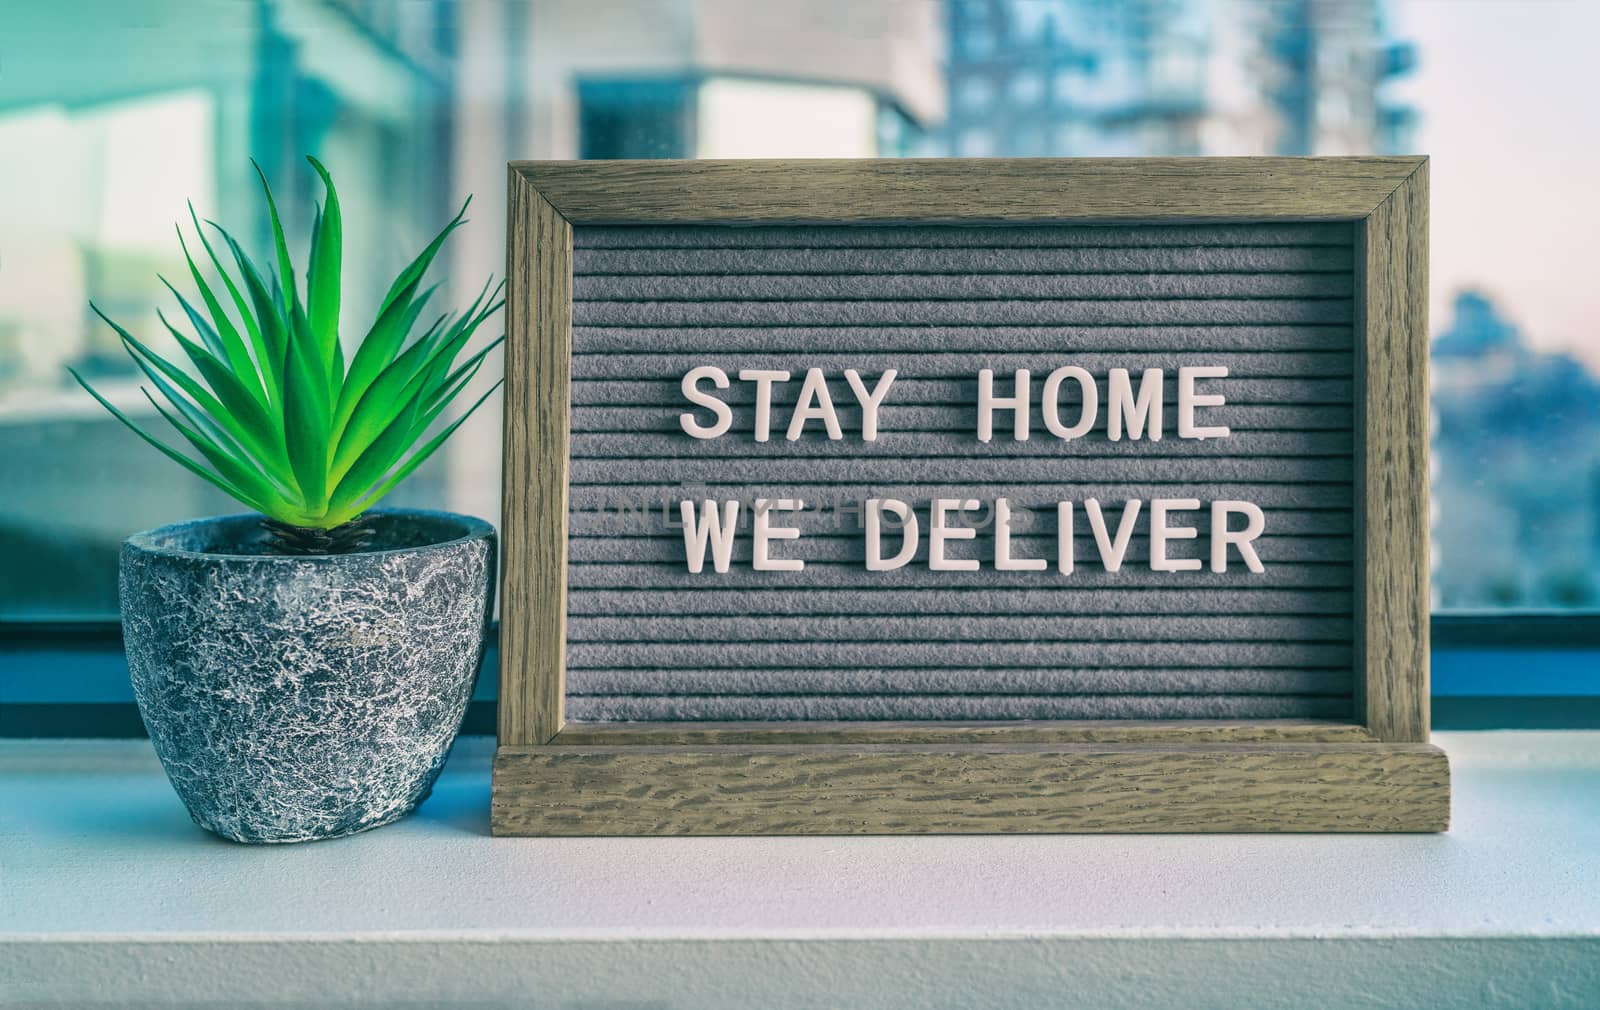 STAY HOME WE DELIVER Coronavirus social distancing restaurant business message sign. COVID-19 online delivery to home, staying inside. Grey felt board with plant by Maridav